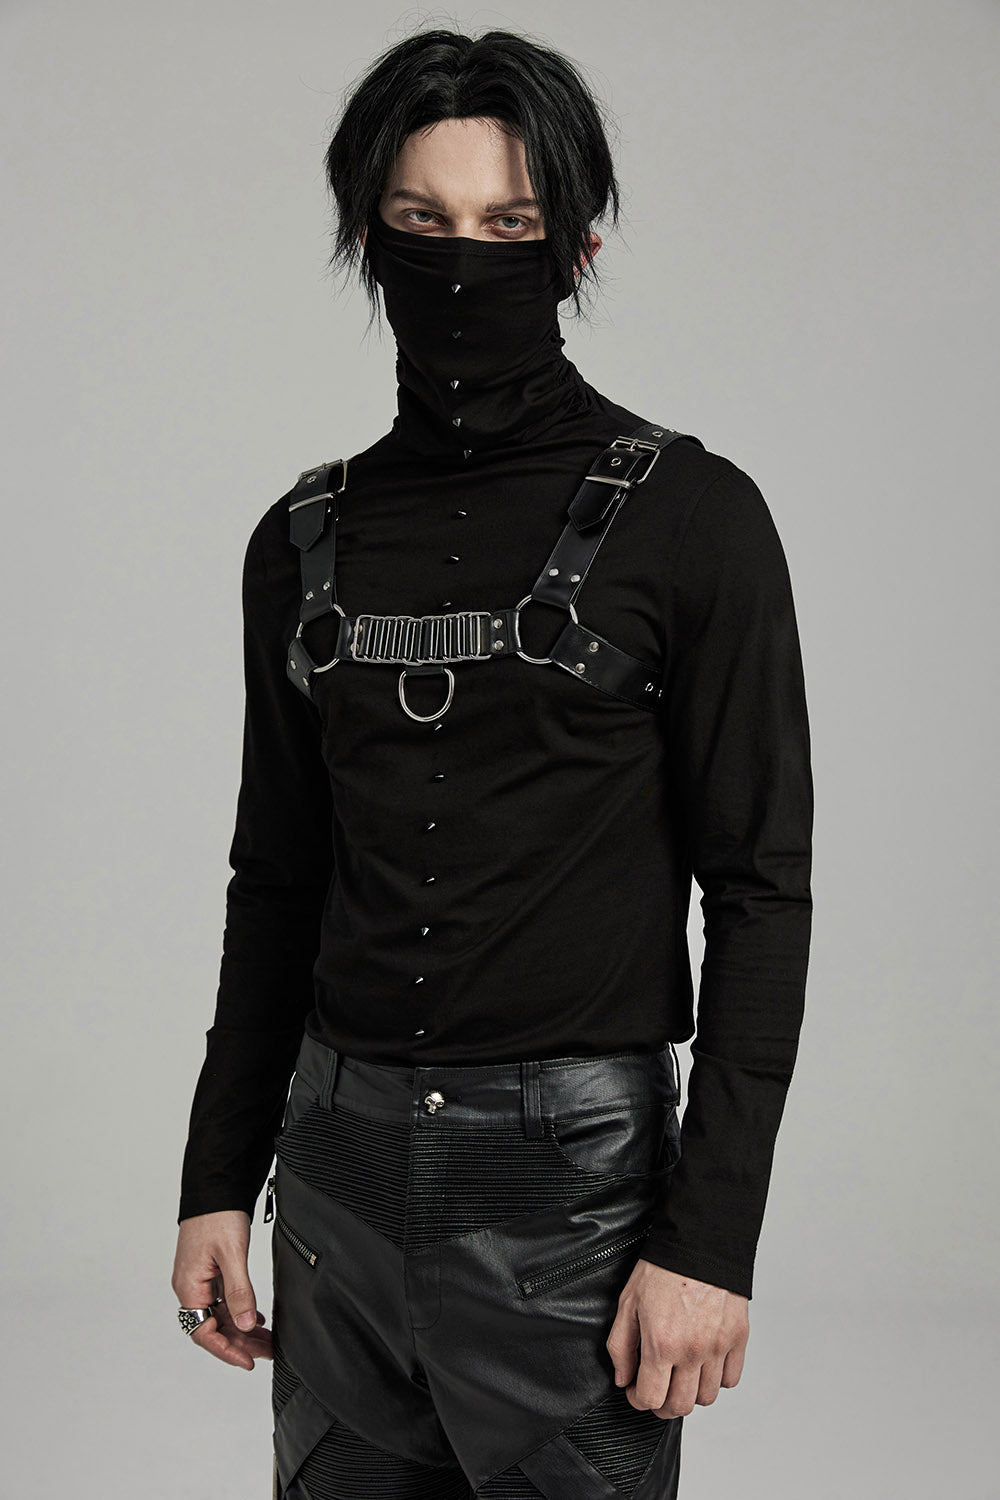 mens goth chest harness